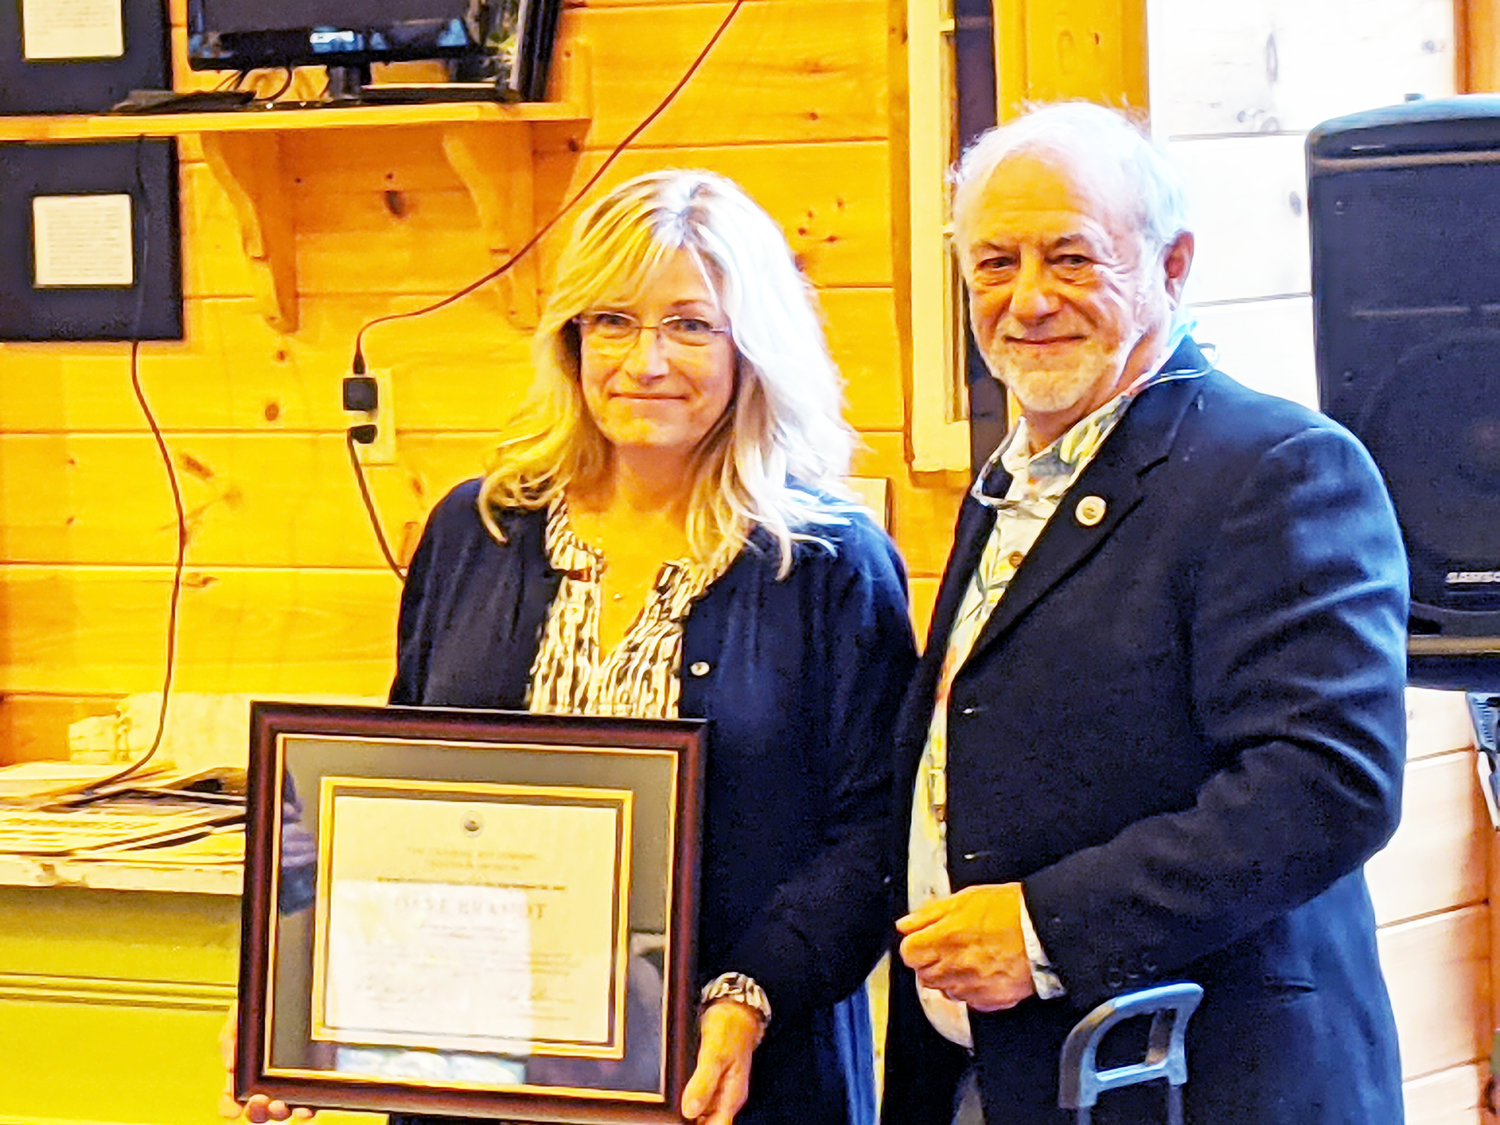 Debra Prendergast, granddaughter of Dave Brandt, accepts the 2021 Hall of Fame award on his behalf from Ted Patlen at the Catskill Fly Fishing Center and Museum ceremony in Livingston Manor.